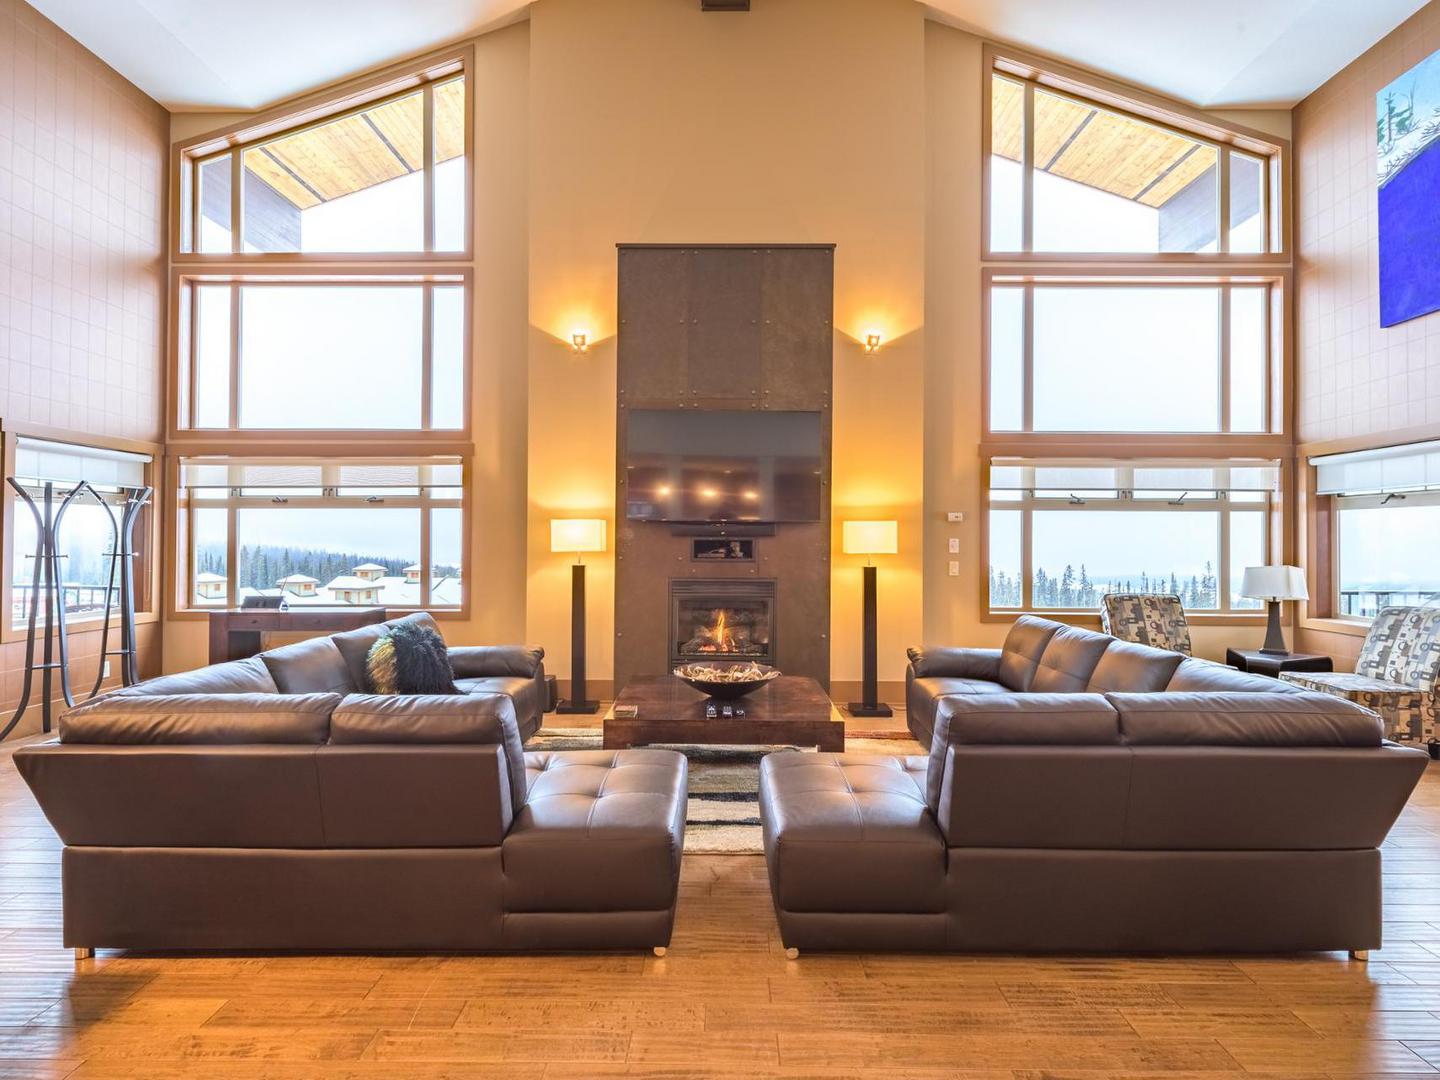 A living room with large leather corner couches, high ceilings and floor to ceiling windows in one of Luxury Mountain Vacation Rentals' units at Big White Ski Resort.